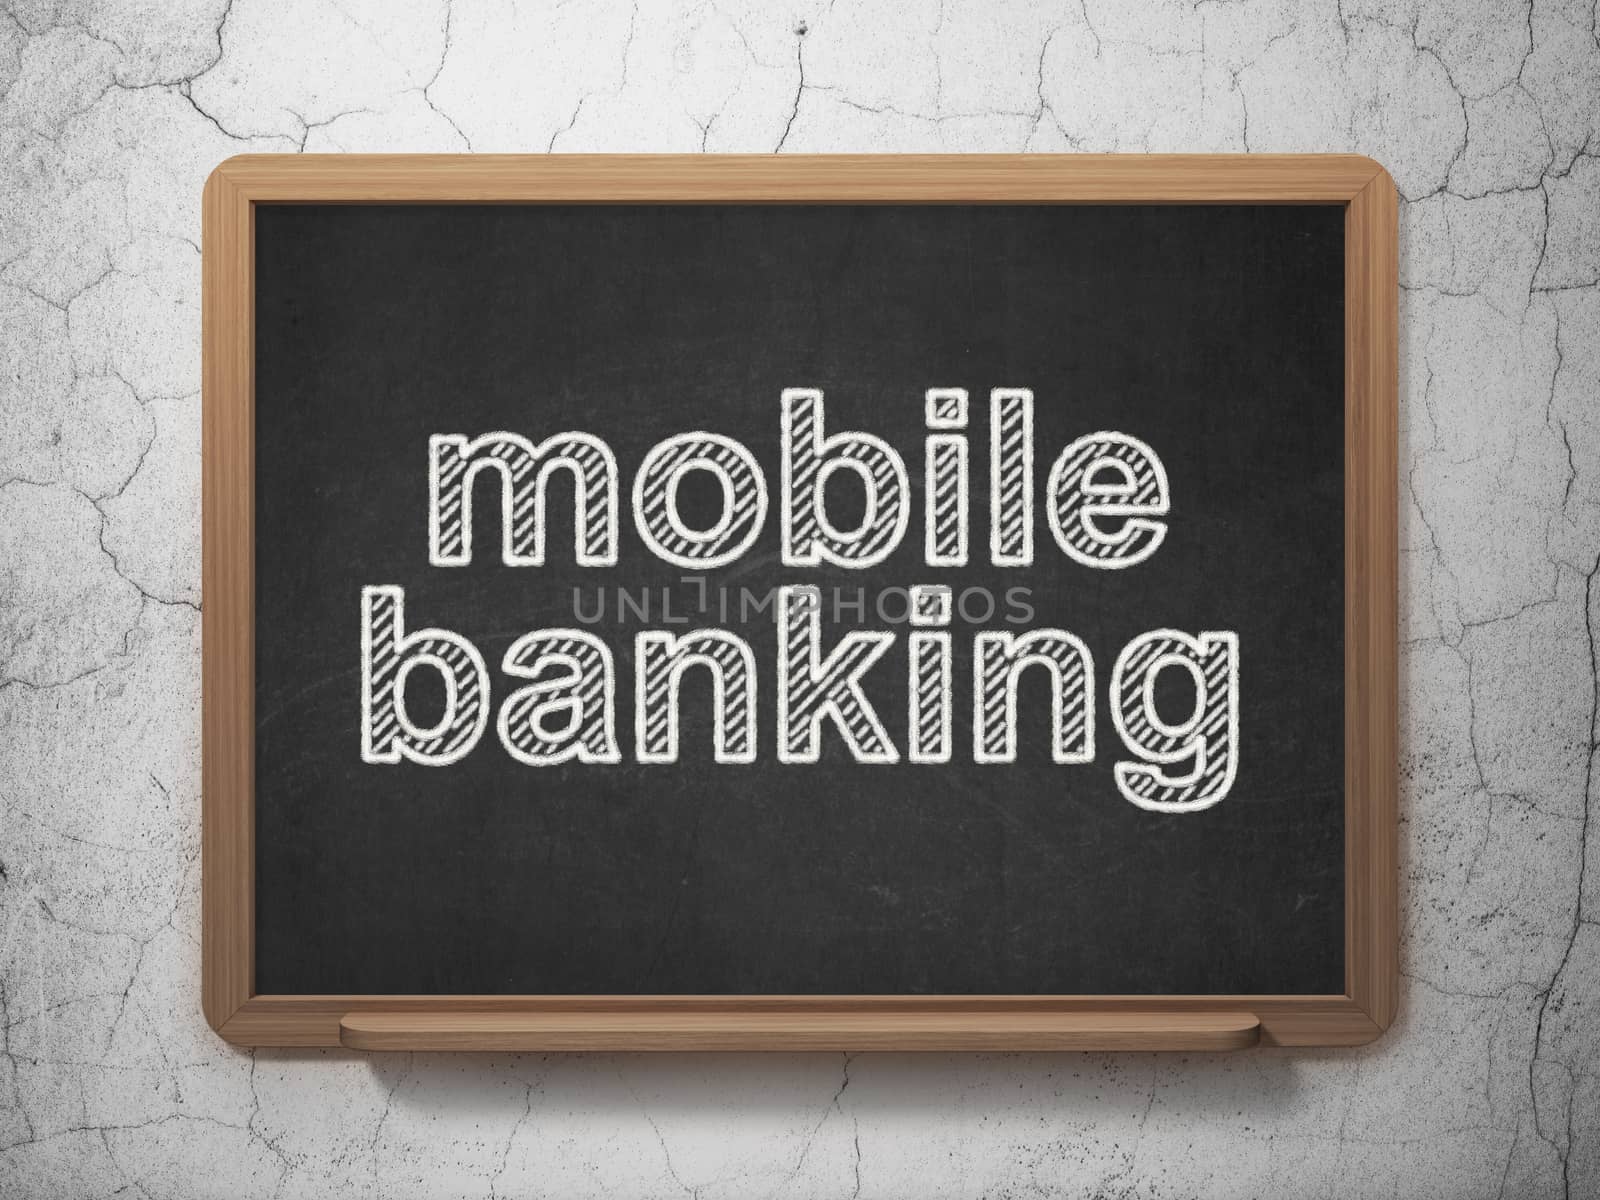 Banking concept: text Mobile Banking on Black chalkboard on grunge wall background, 3D rendering